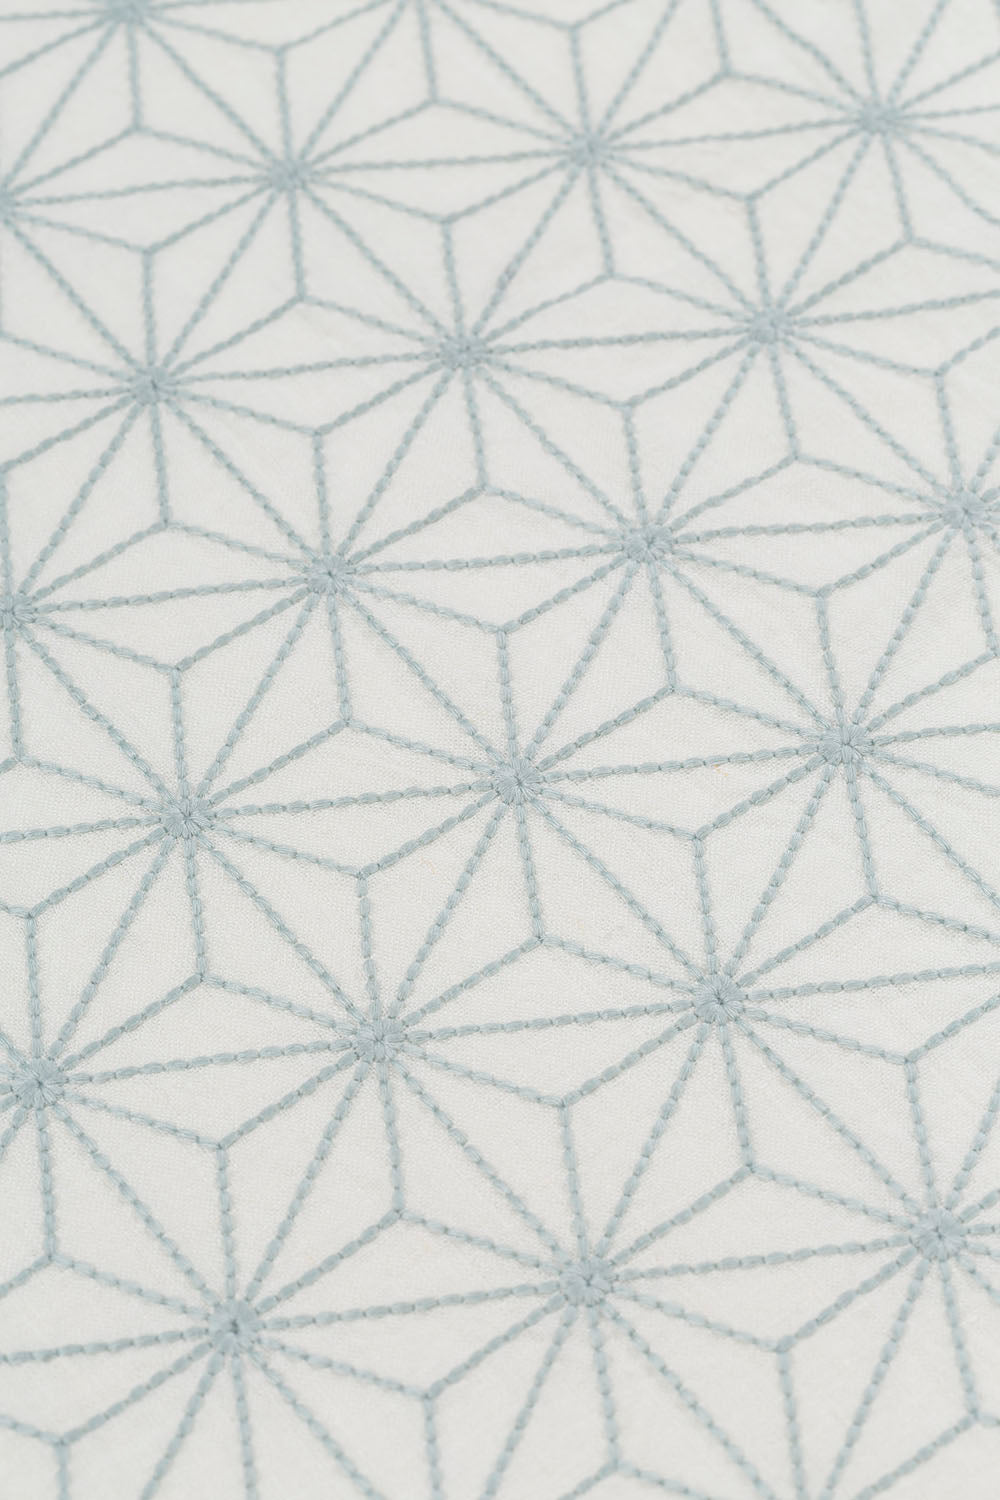 Fabric yardage with an embroidered floral lattice print in light gray on a cream field.